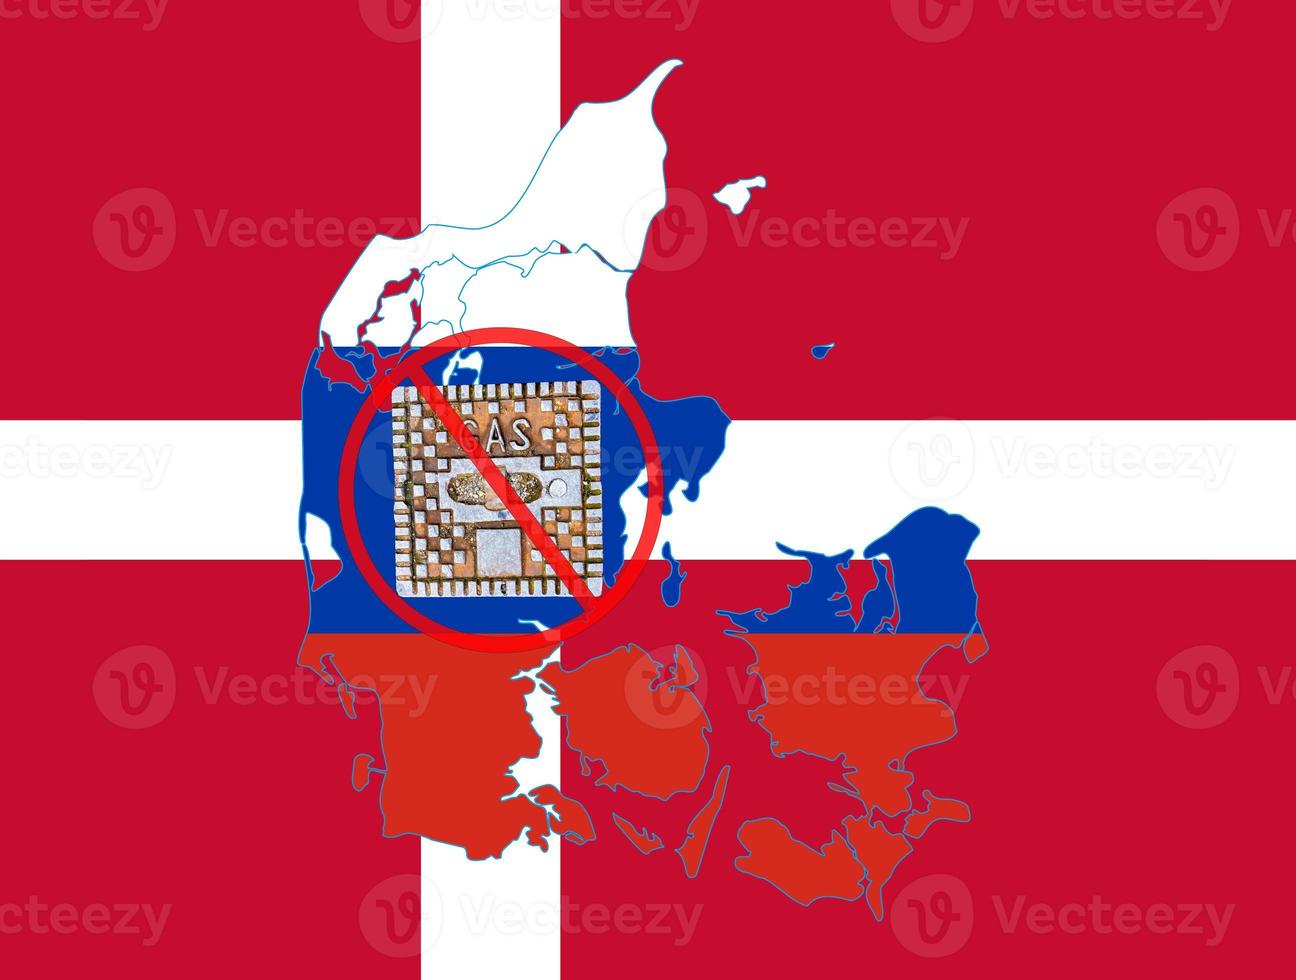 Outline map of Denmark with the image of the national flag. Manhole cover of the gas pipeline system on the flag of Russia inside the map. Collage. Energy crisis. photo